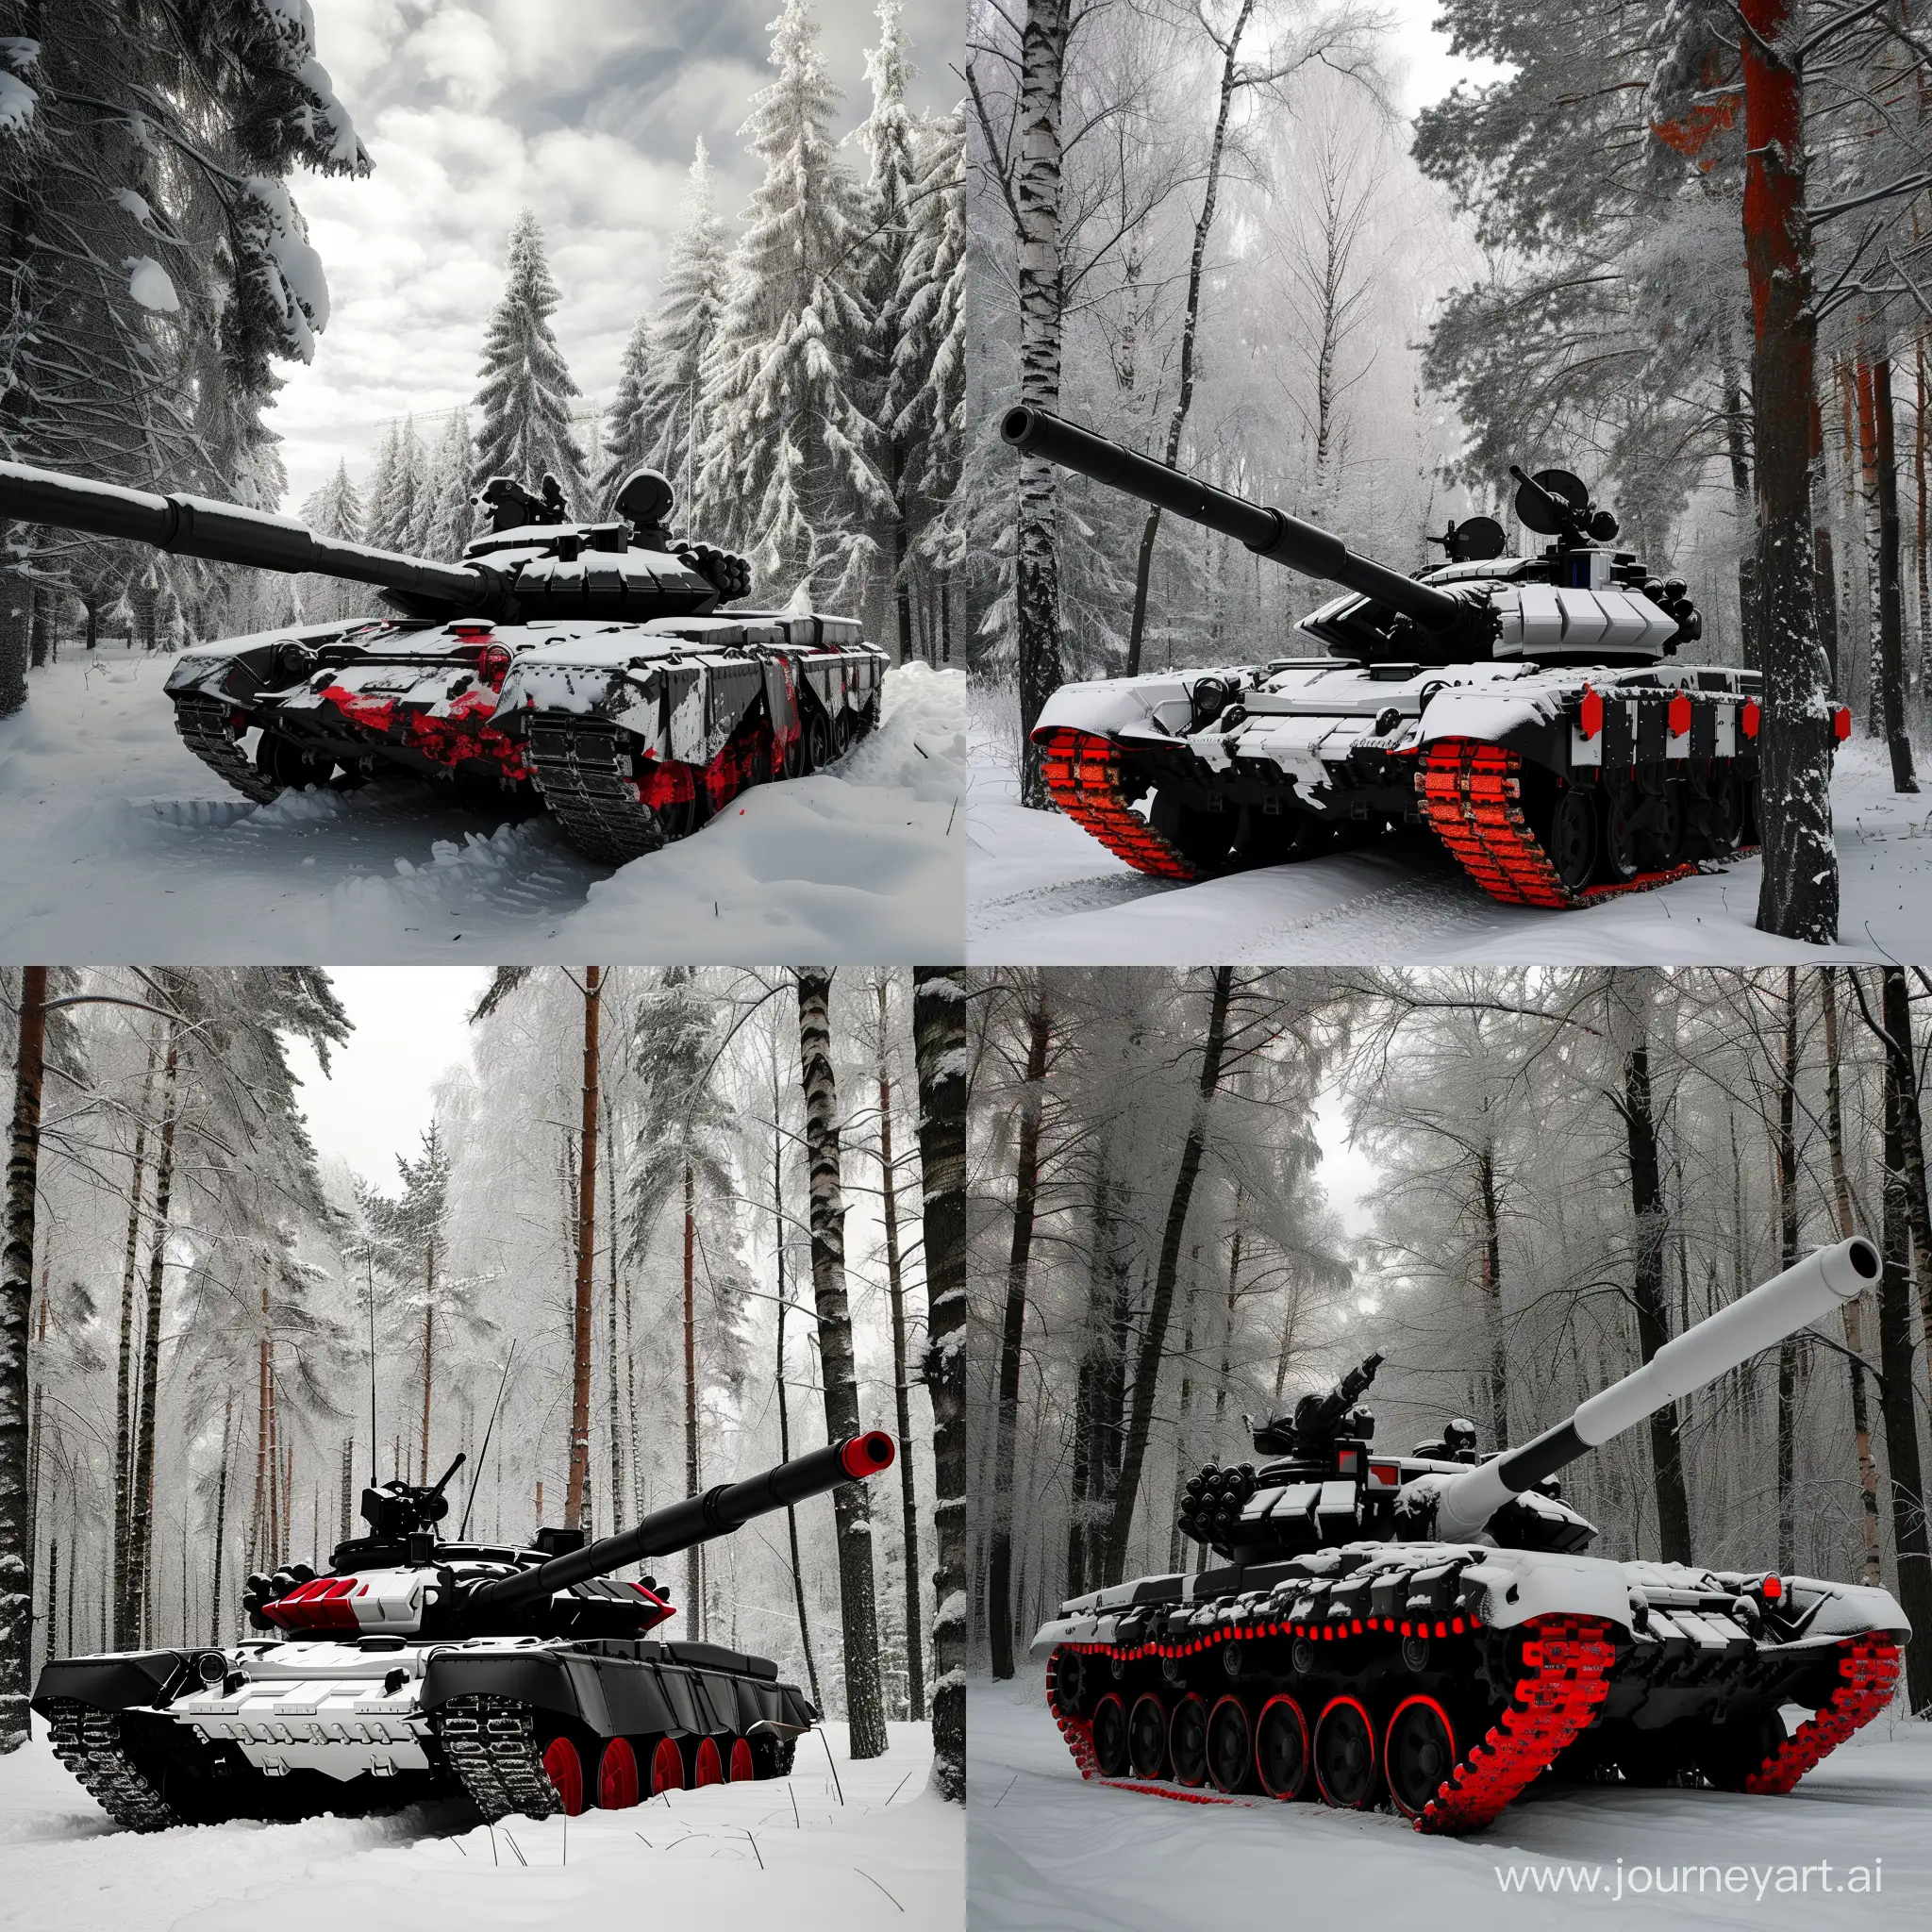 Modern-Tank-in-Black-and-White-with-Red-Accents-in-Winter-Forest-Daylight